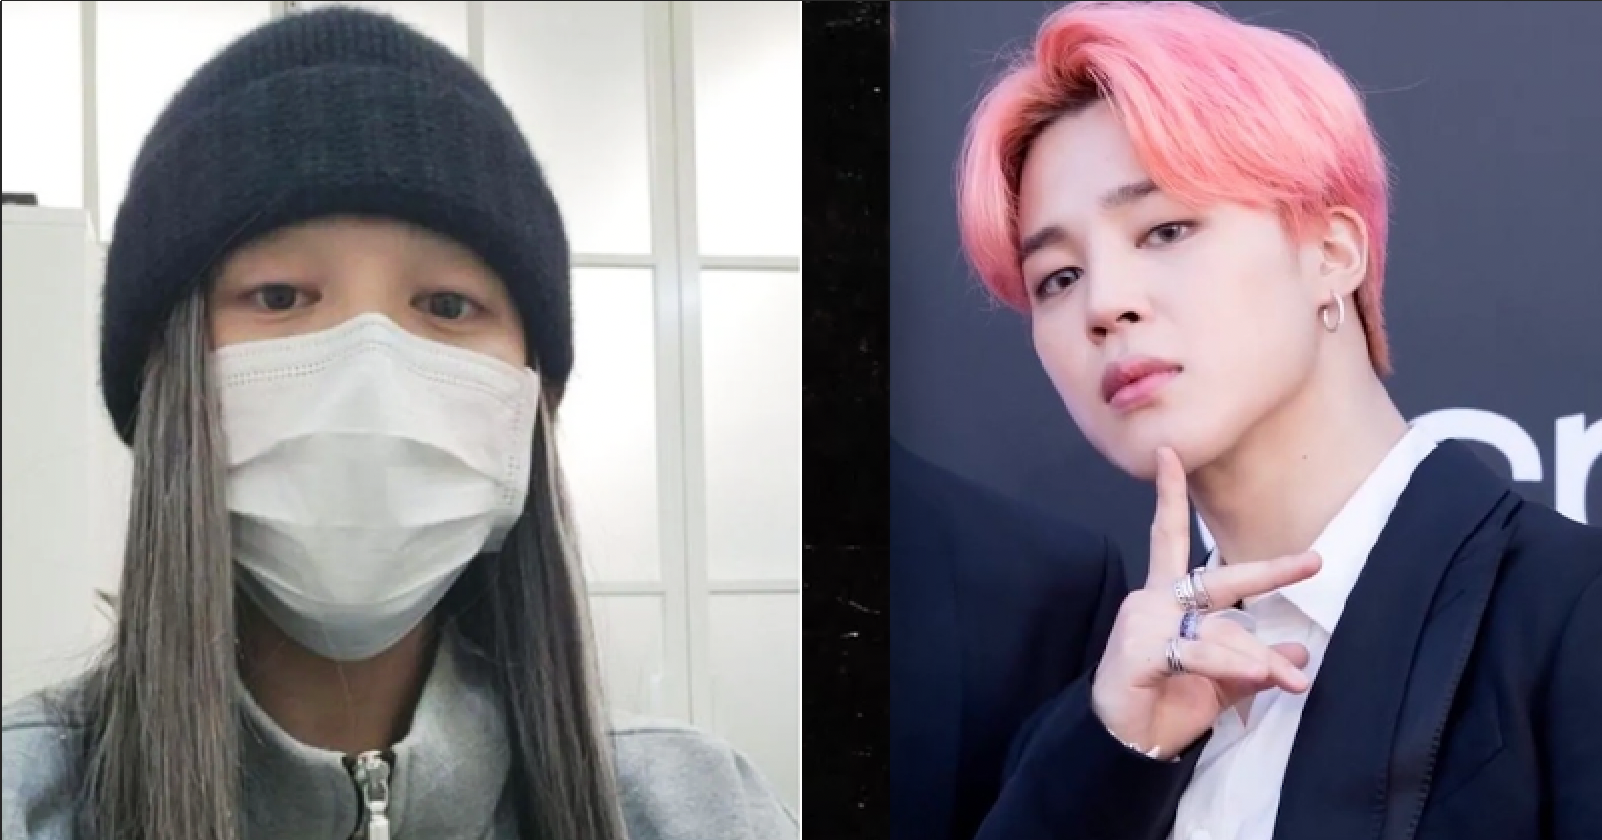 BTS’s Jimin Can Pull Off Any Hair Color And Hairstyle, And Here’s Proof